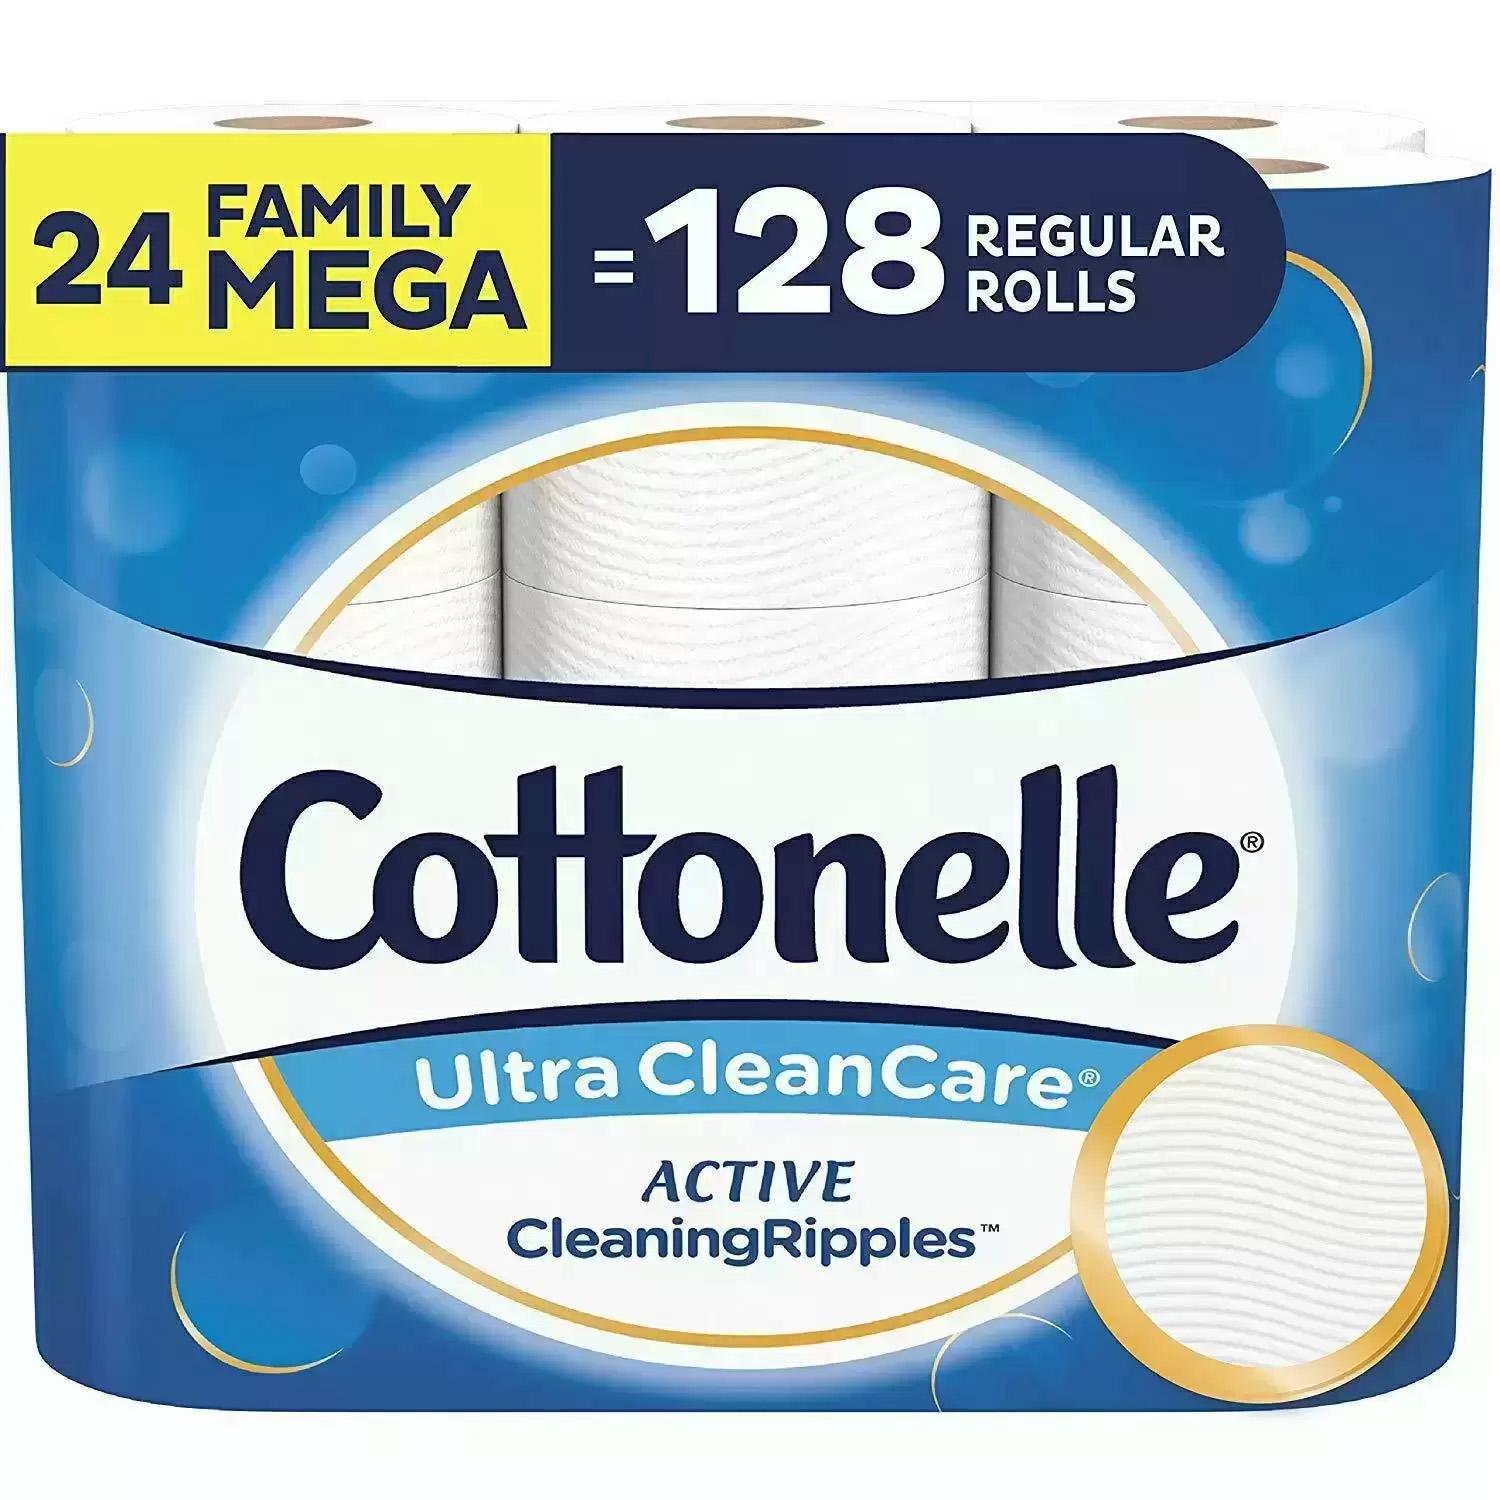 24 Cottonelle Ultra CleanCare Toilet Paper Family Mega Rolls for $22.66 Shipped